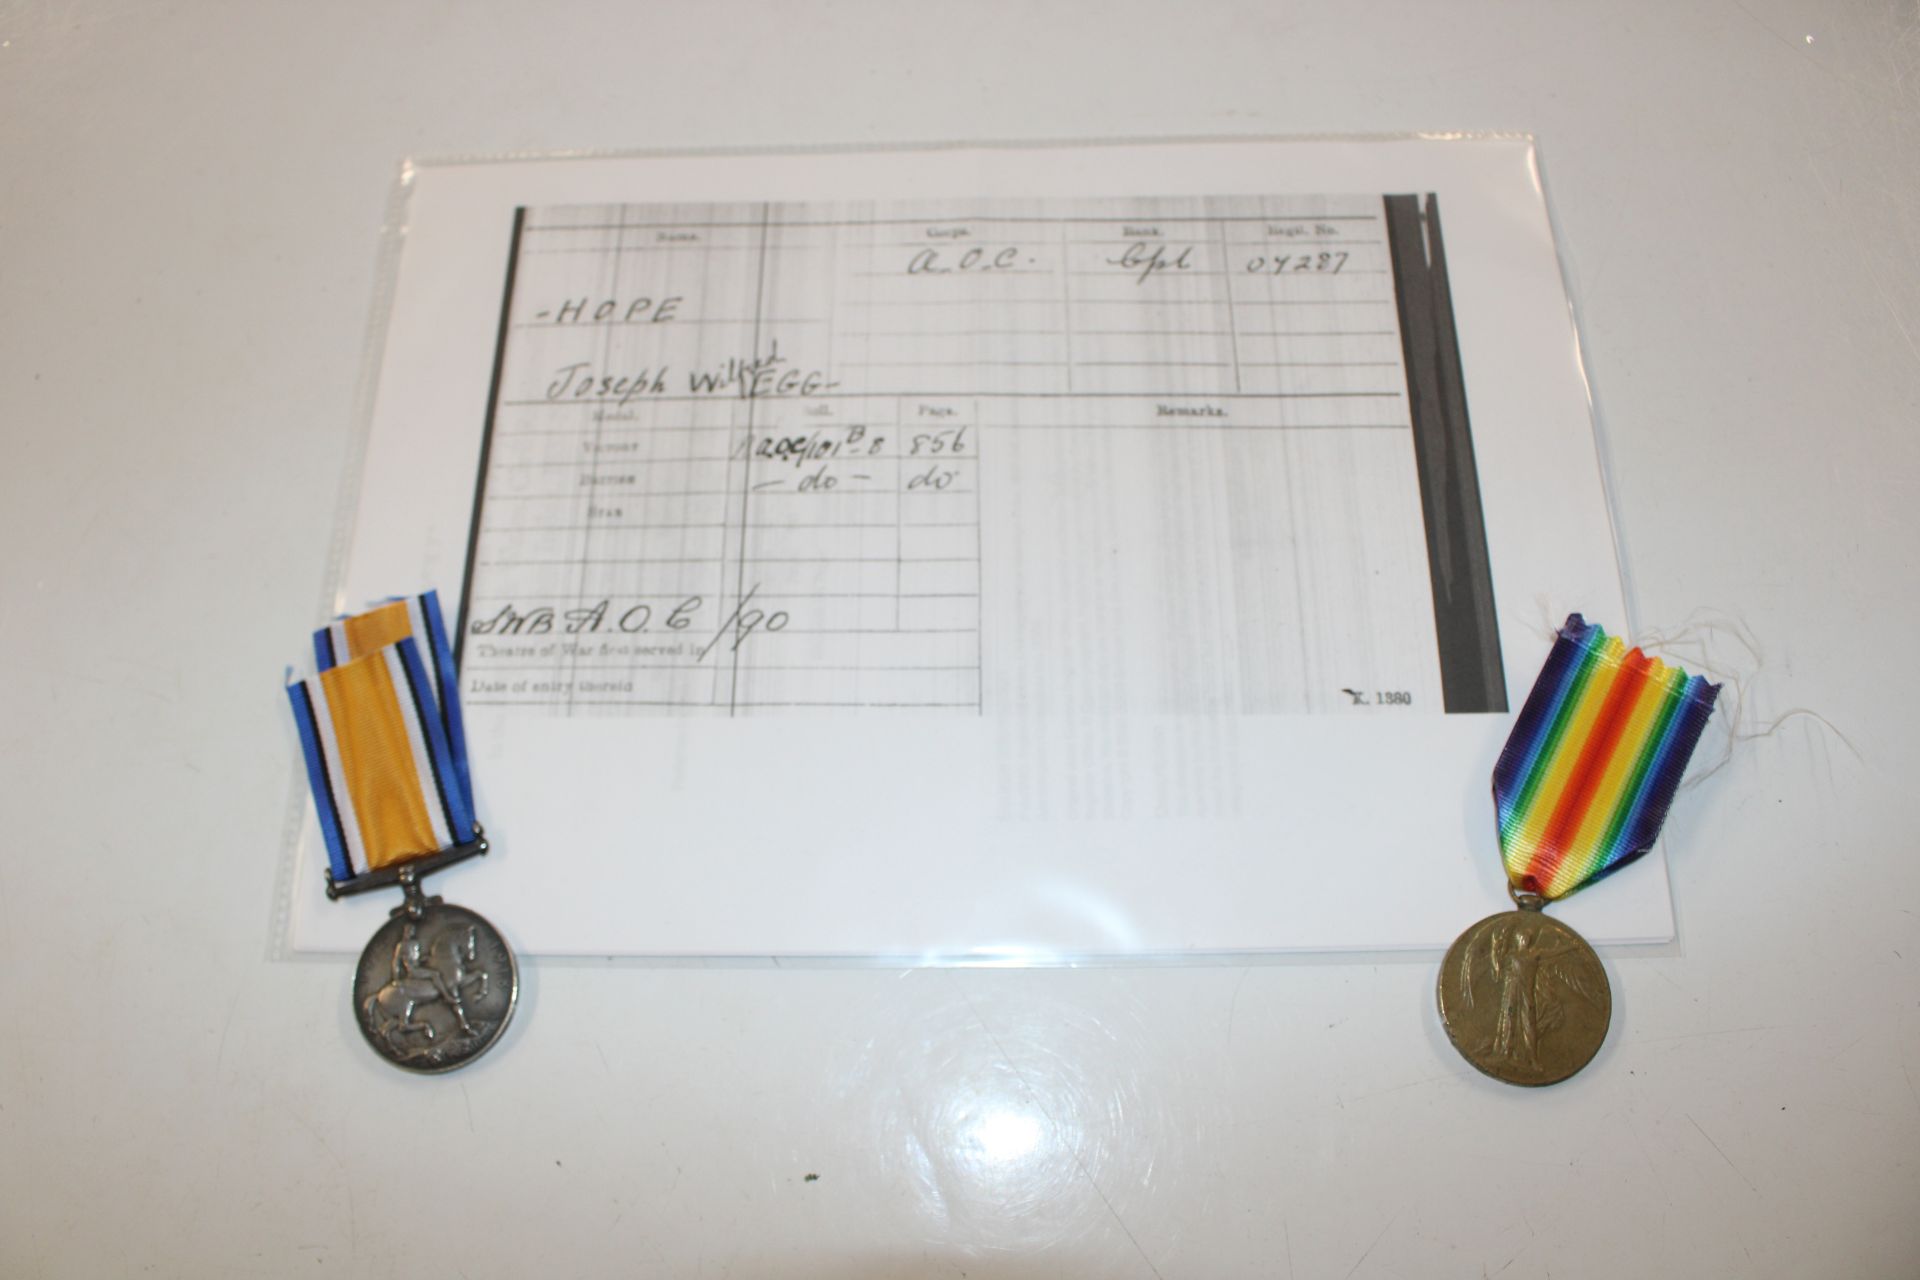 WWI pair of medals with research to 07287 Crp. J.W